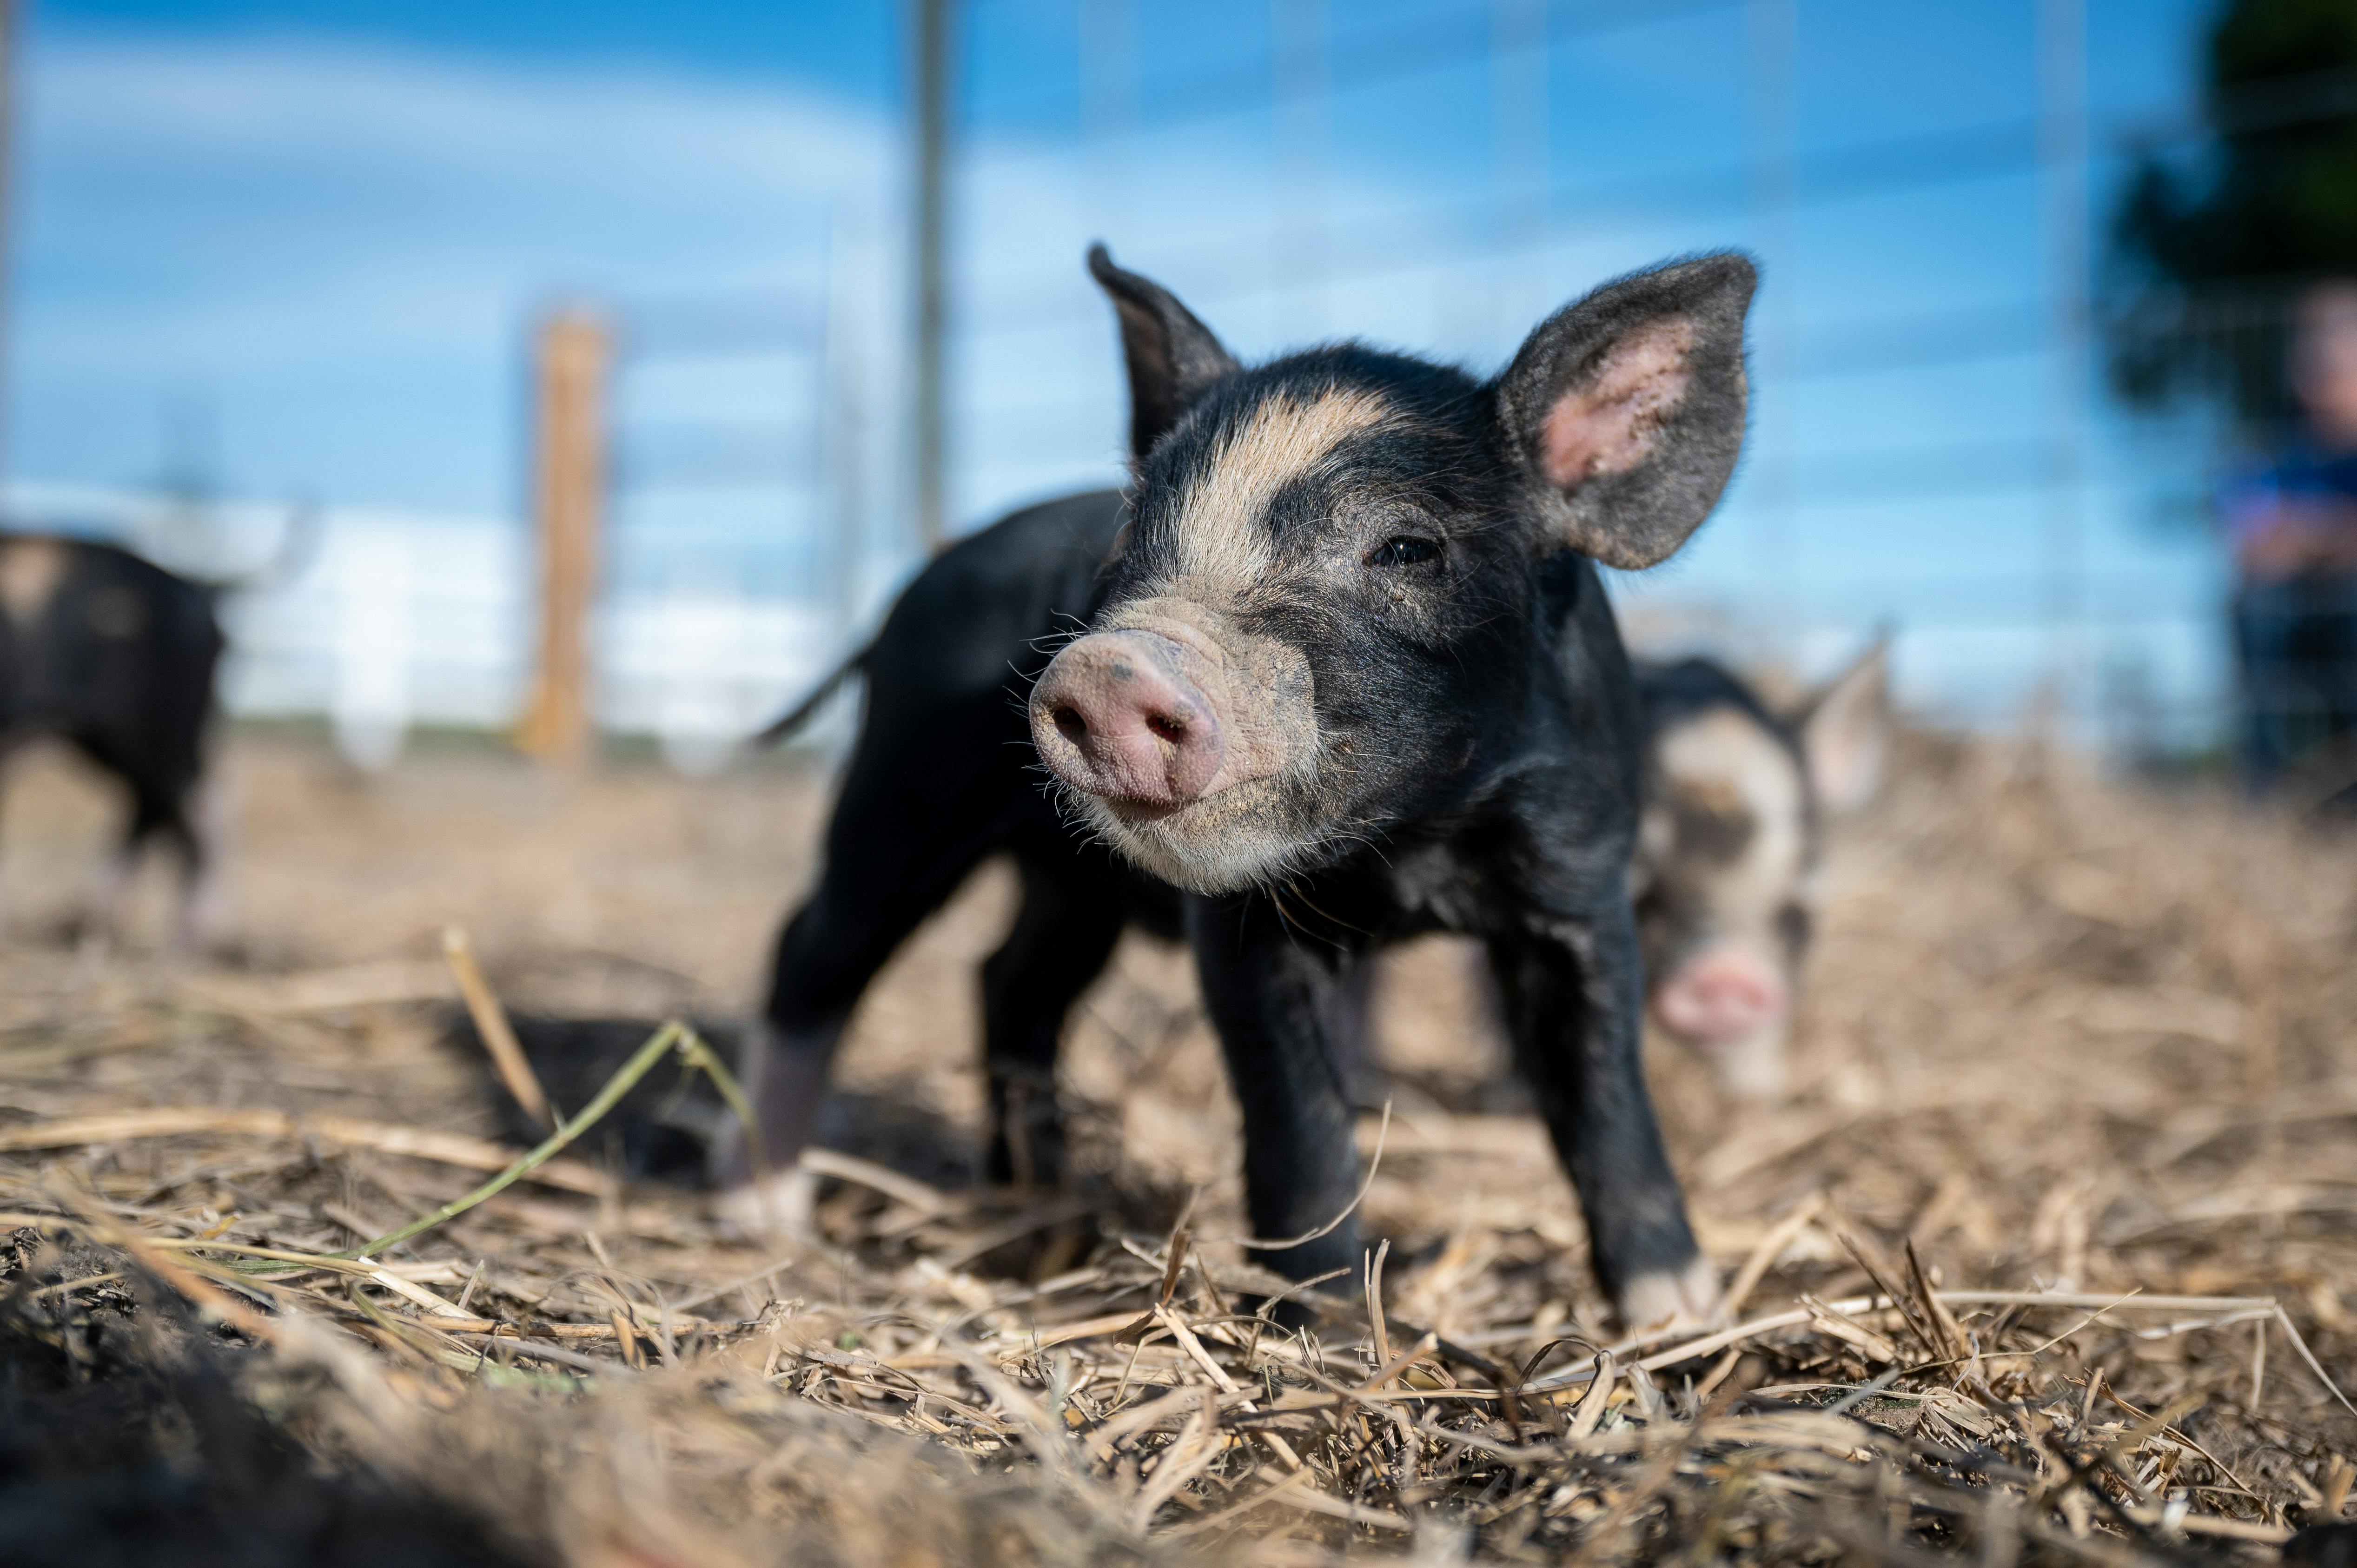 adorable small pig on dry land near fence